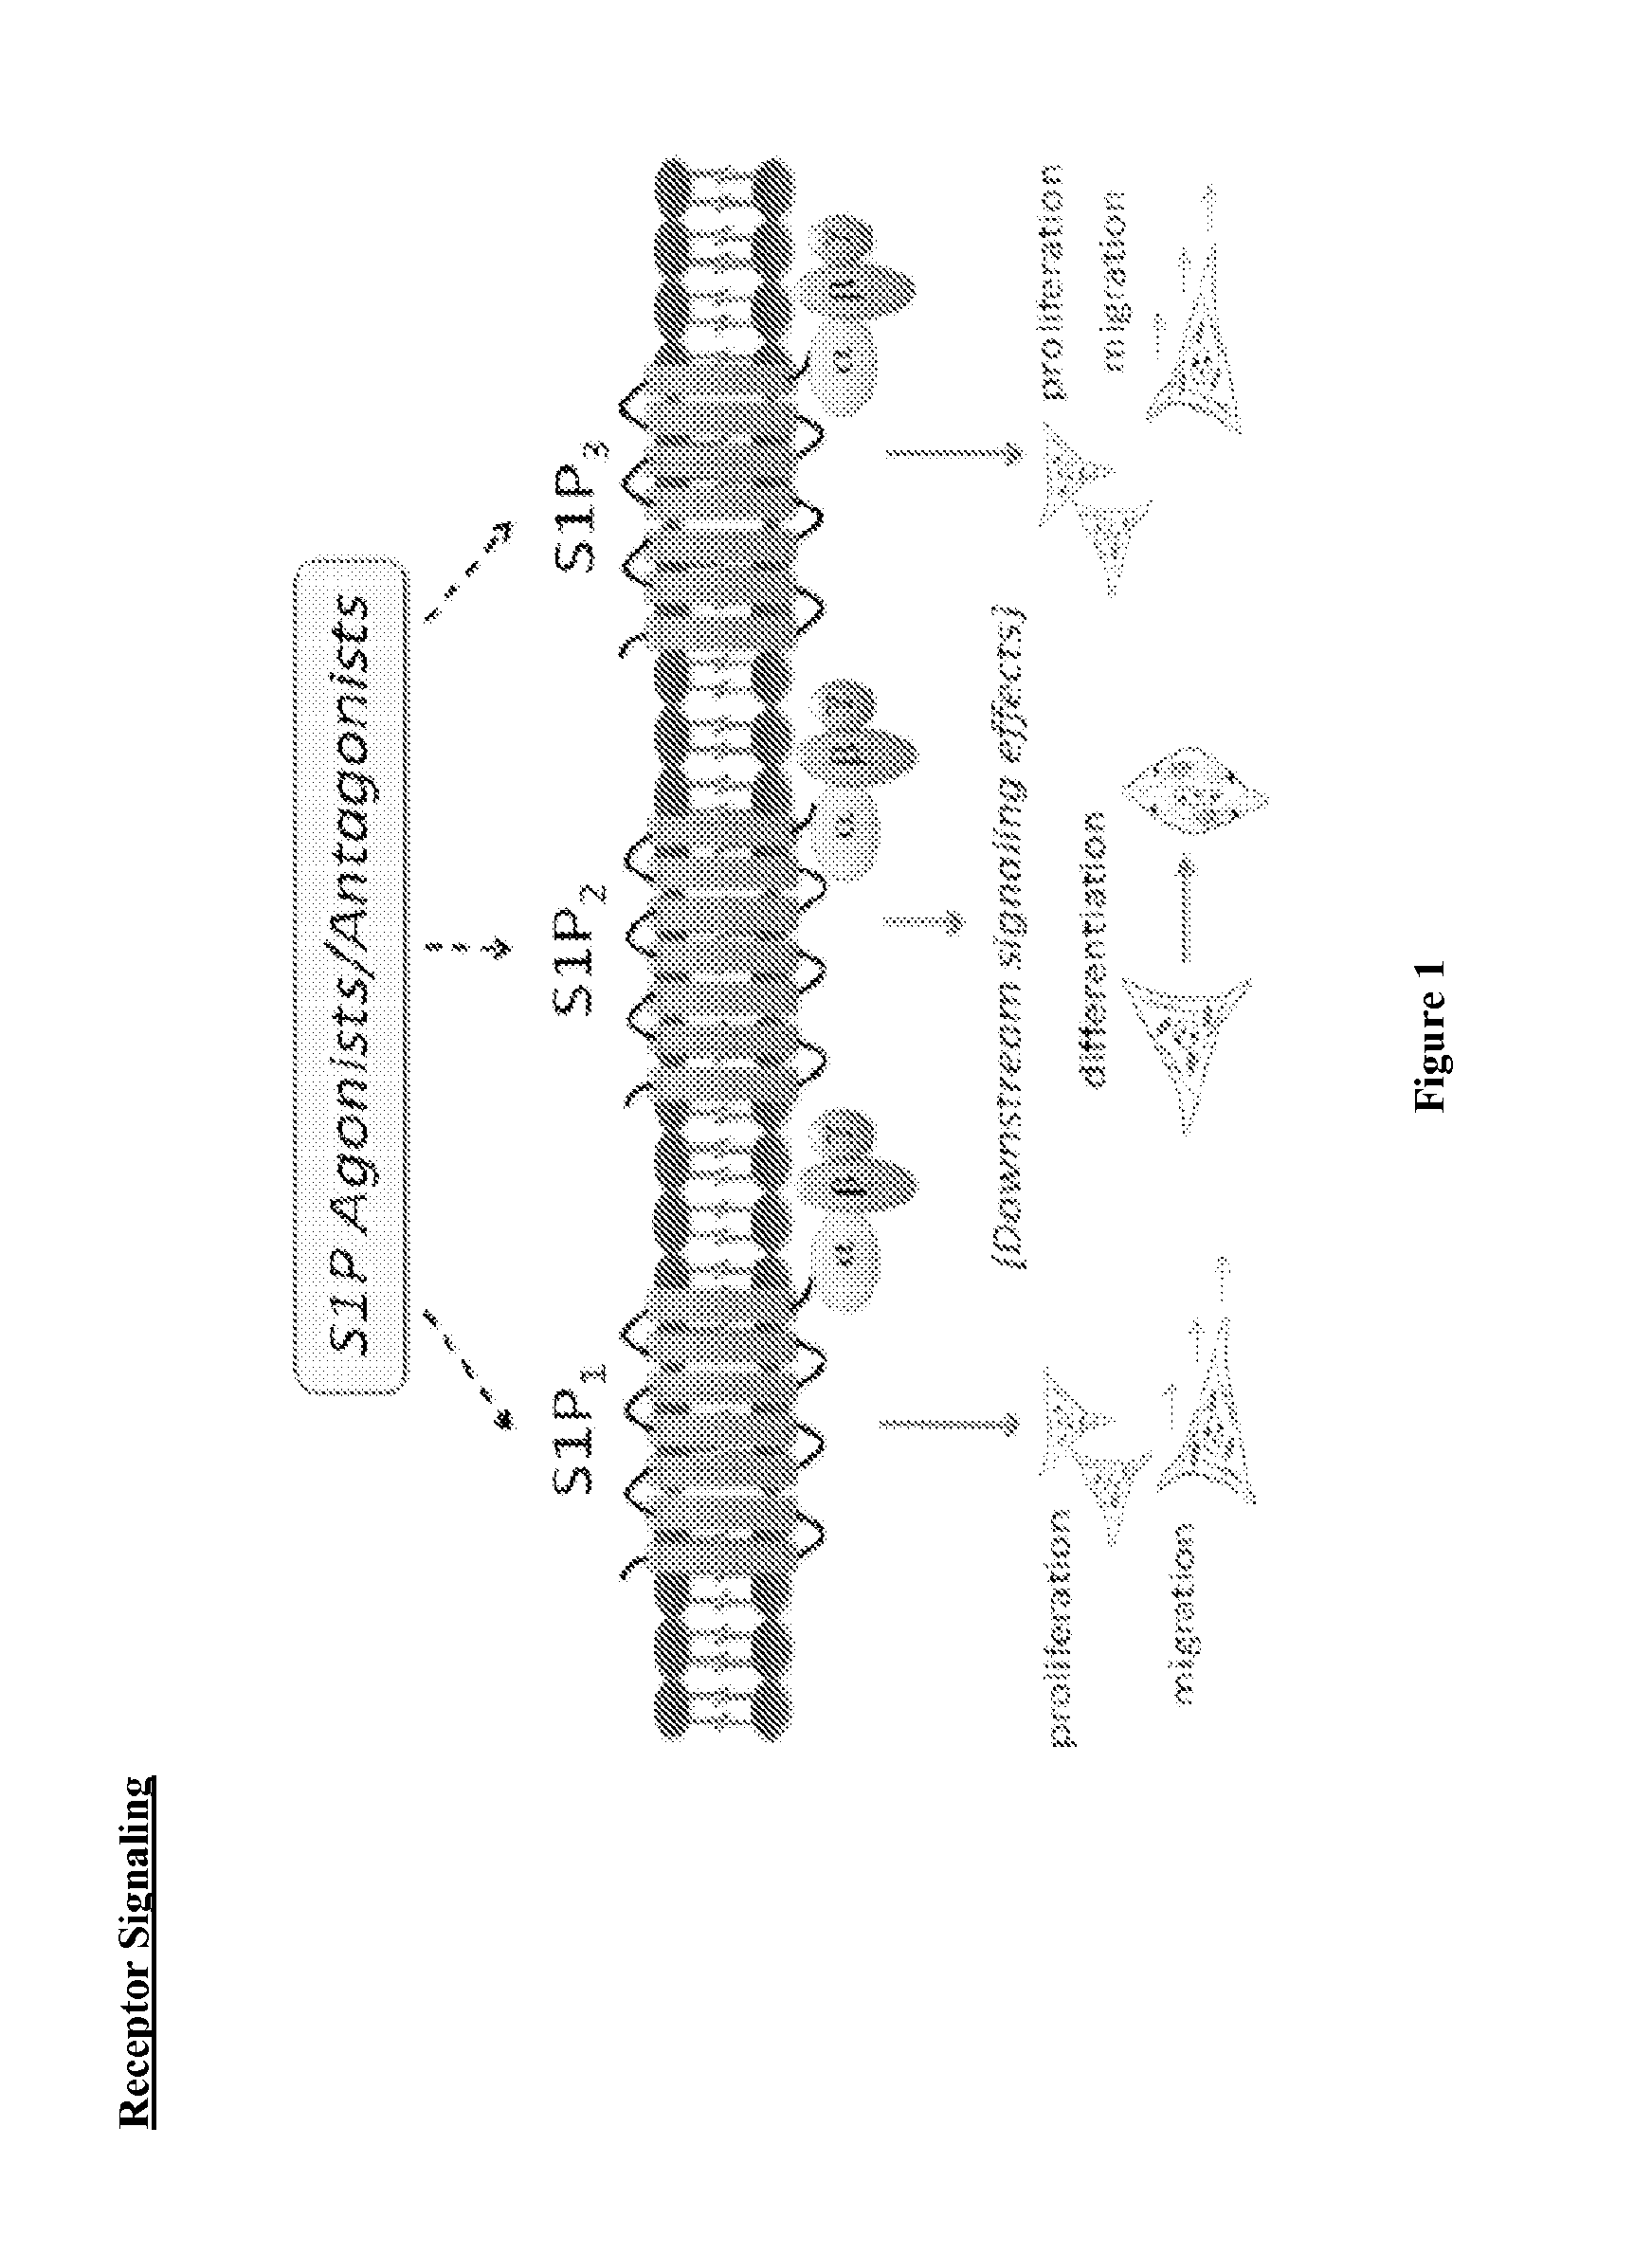 Compositions and methods for tissue engineering and cell based therapies